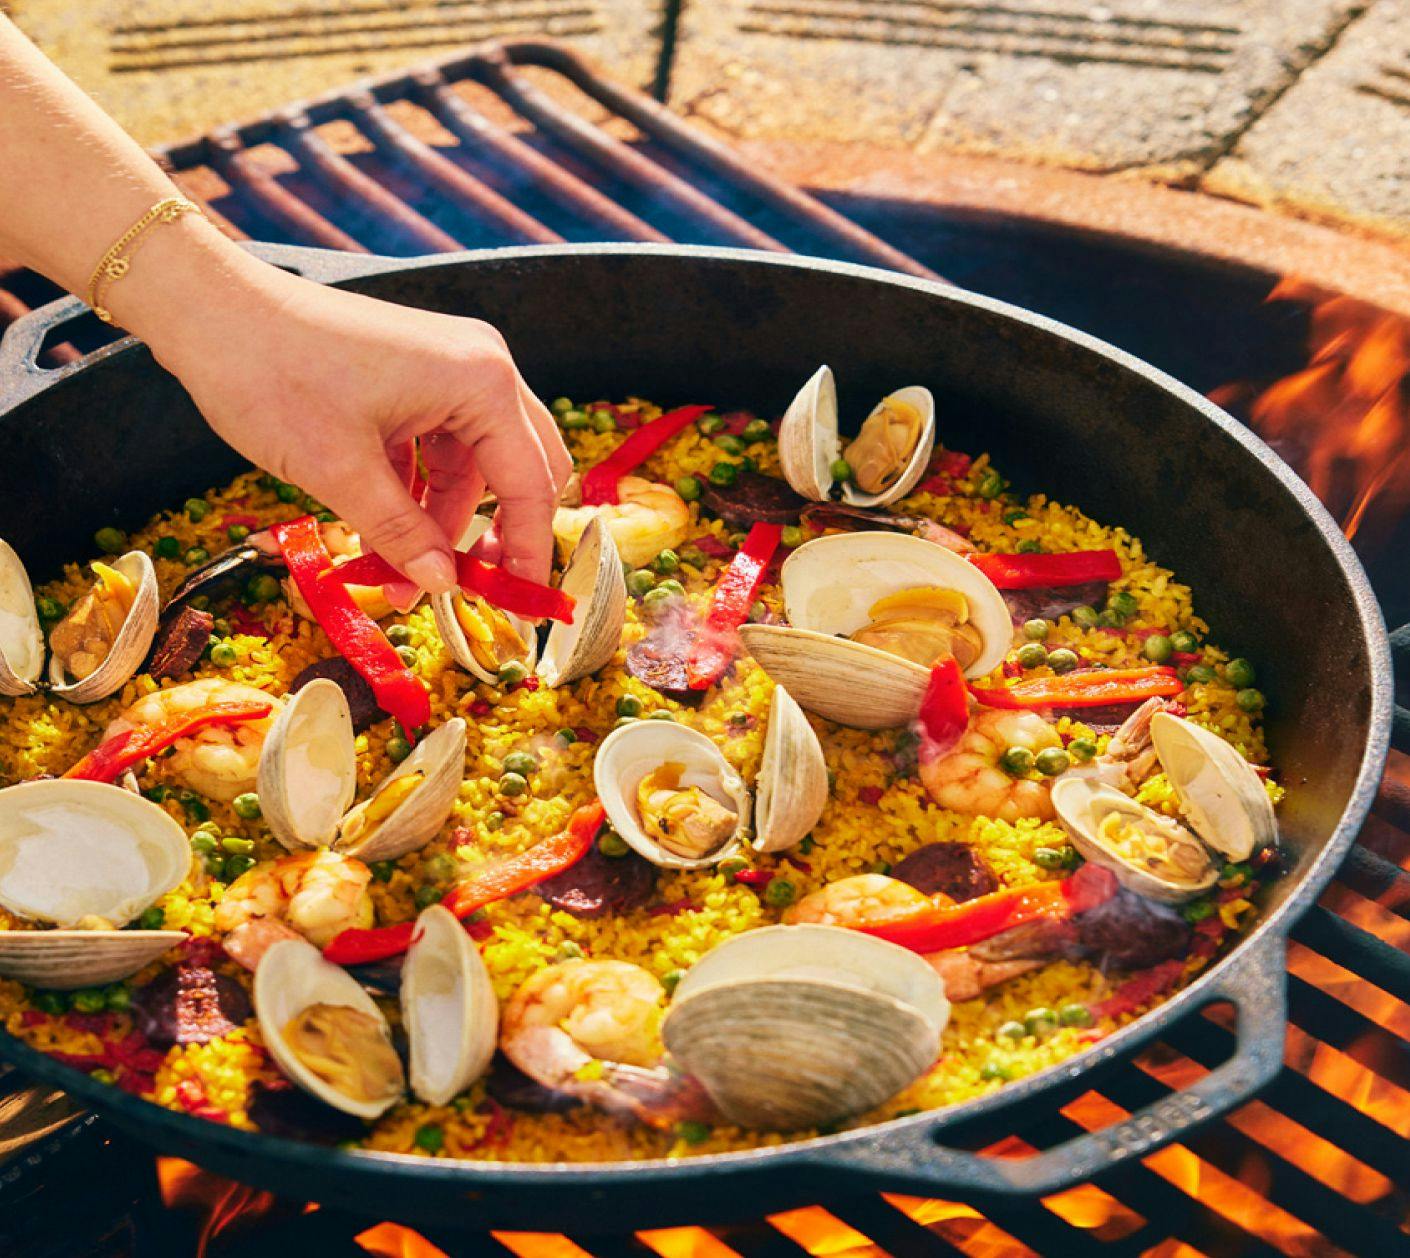 Paella pan on grill with peppers, clams, and saffron rice